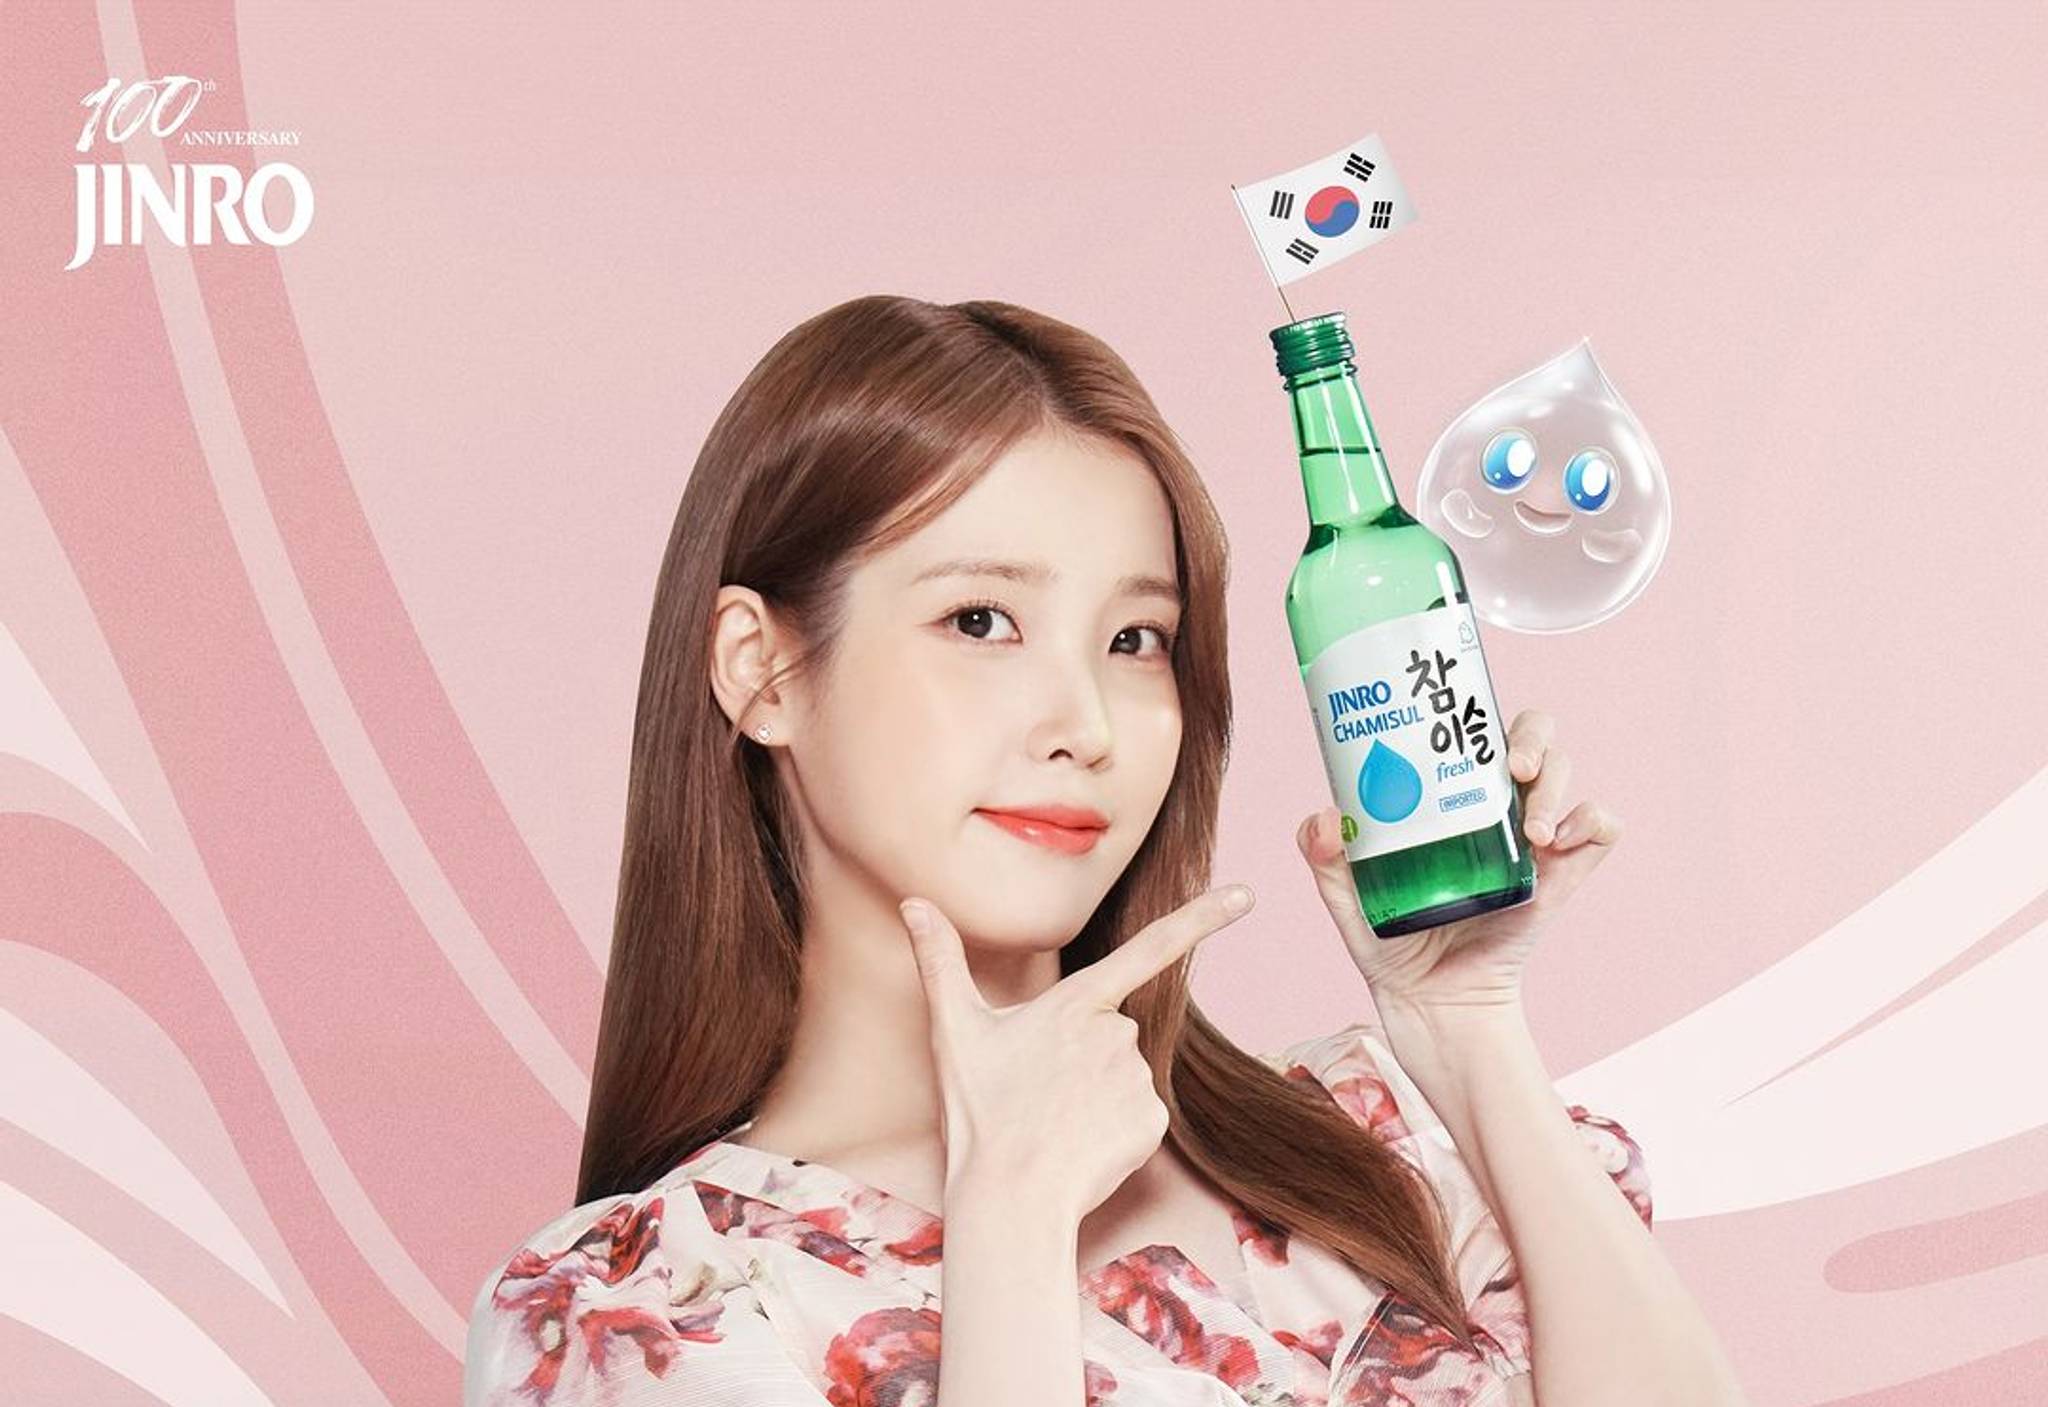 Why Jinro Soju toasts the softer drinking habits of Koreans